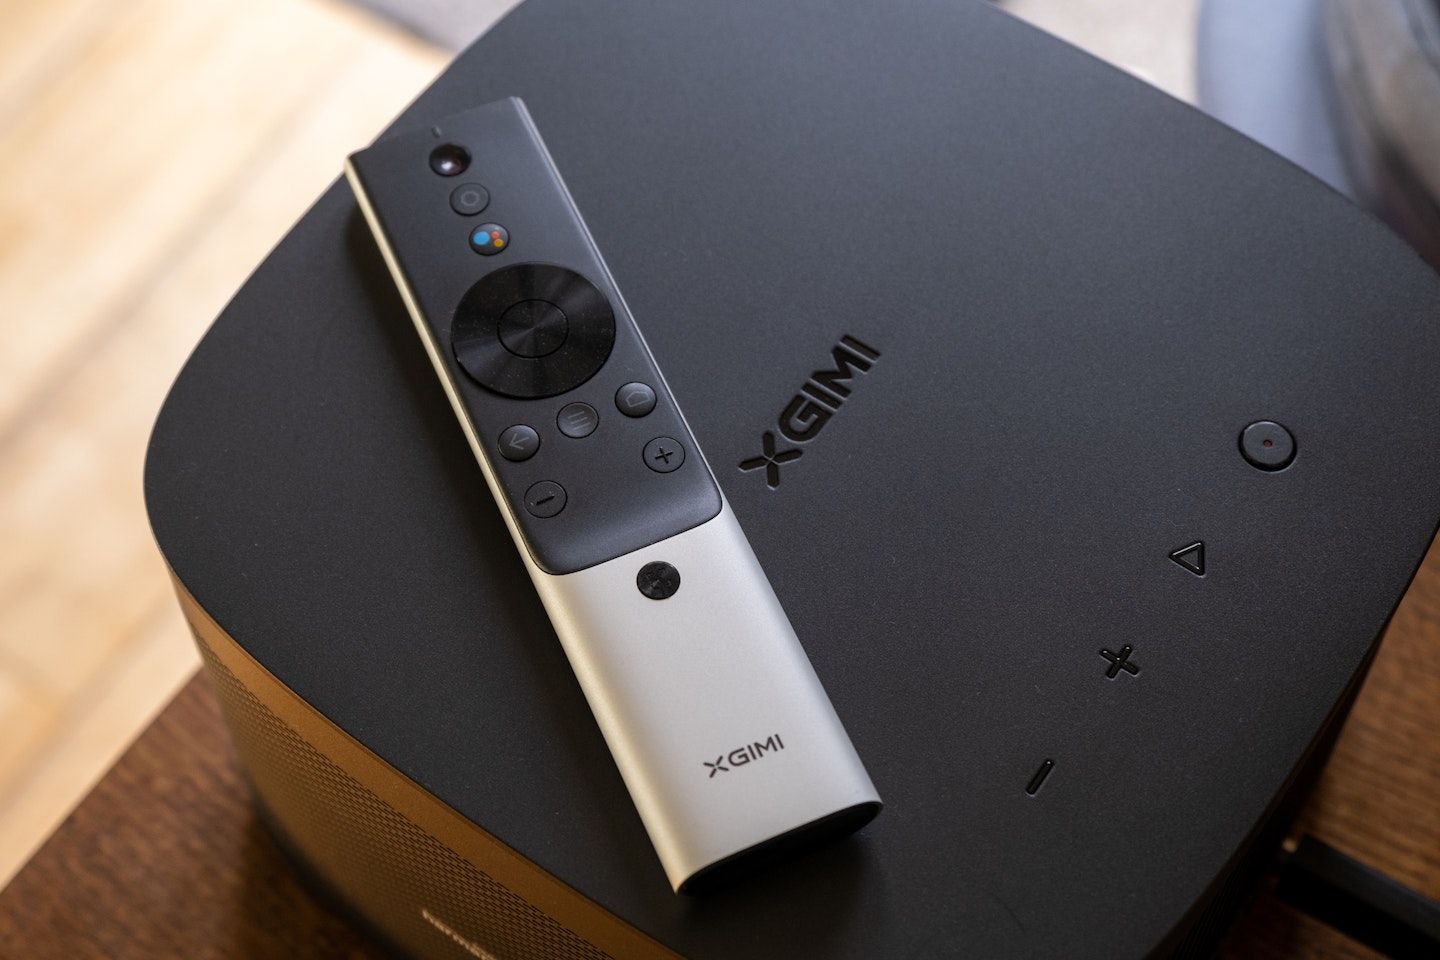 XGIMI HORIZON Pro 4K Projector and remote control